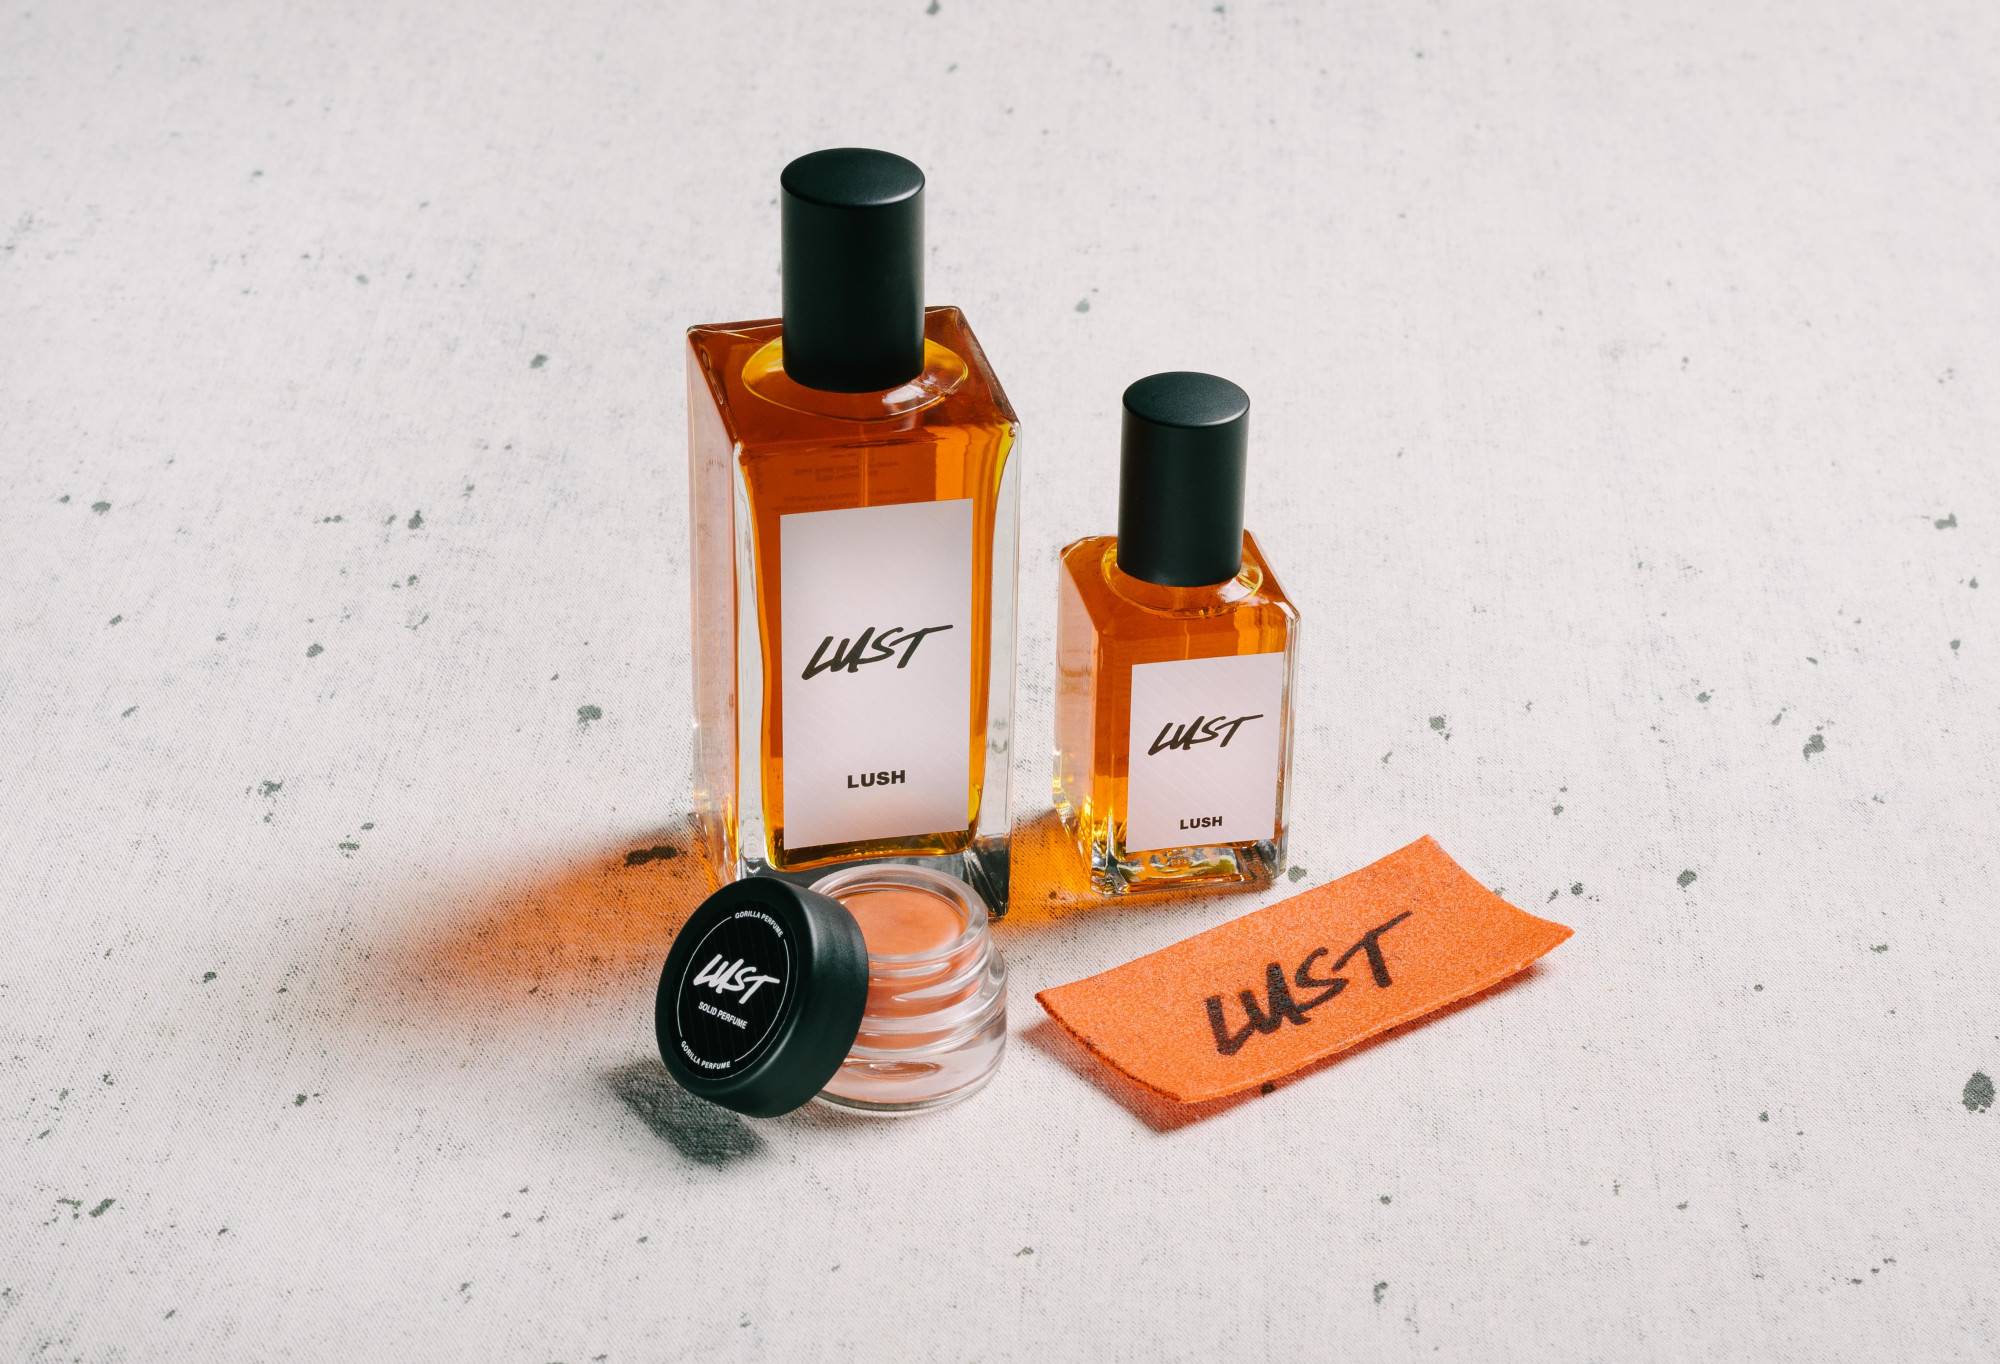 The whole Lust fragrance collection is displayed on a white surface, flecked with grey.